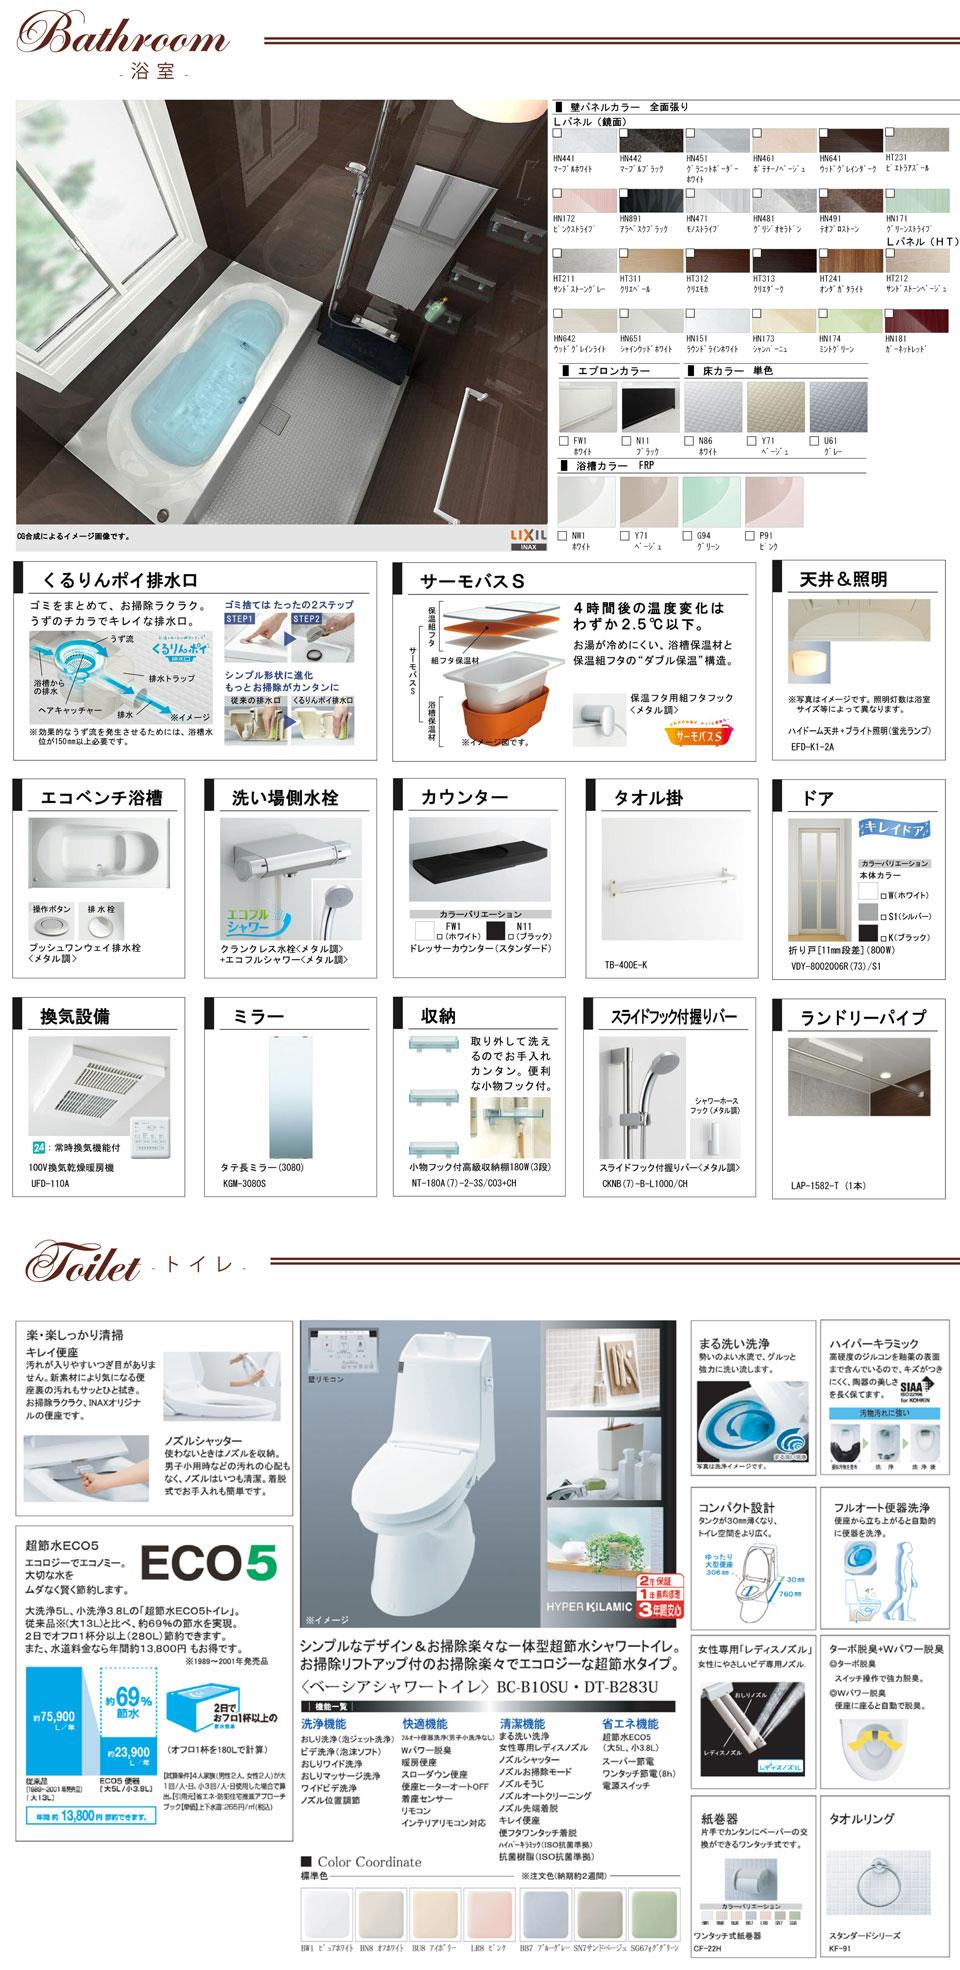 Other. Bathroom standard specification